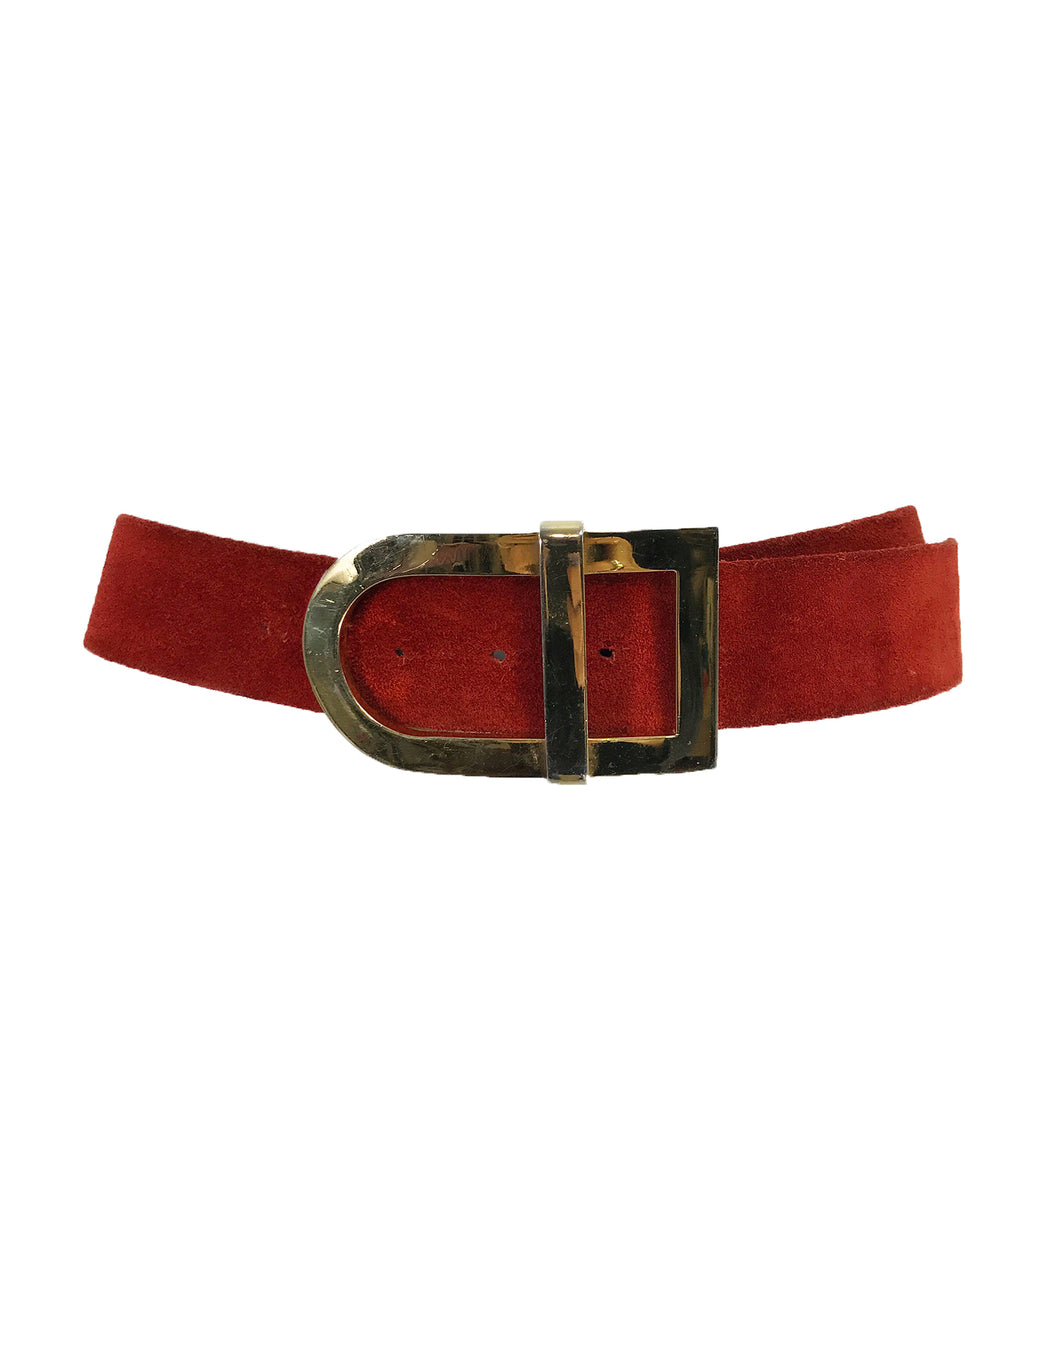 Christian Dior Brick Red Suede Belt with Gold Buckle